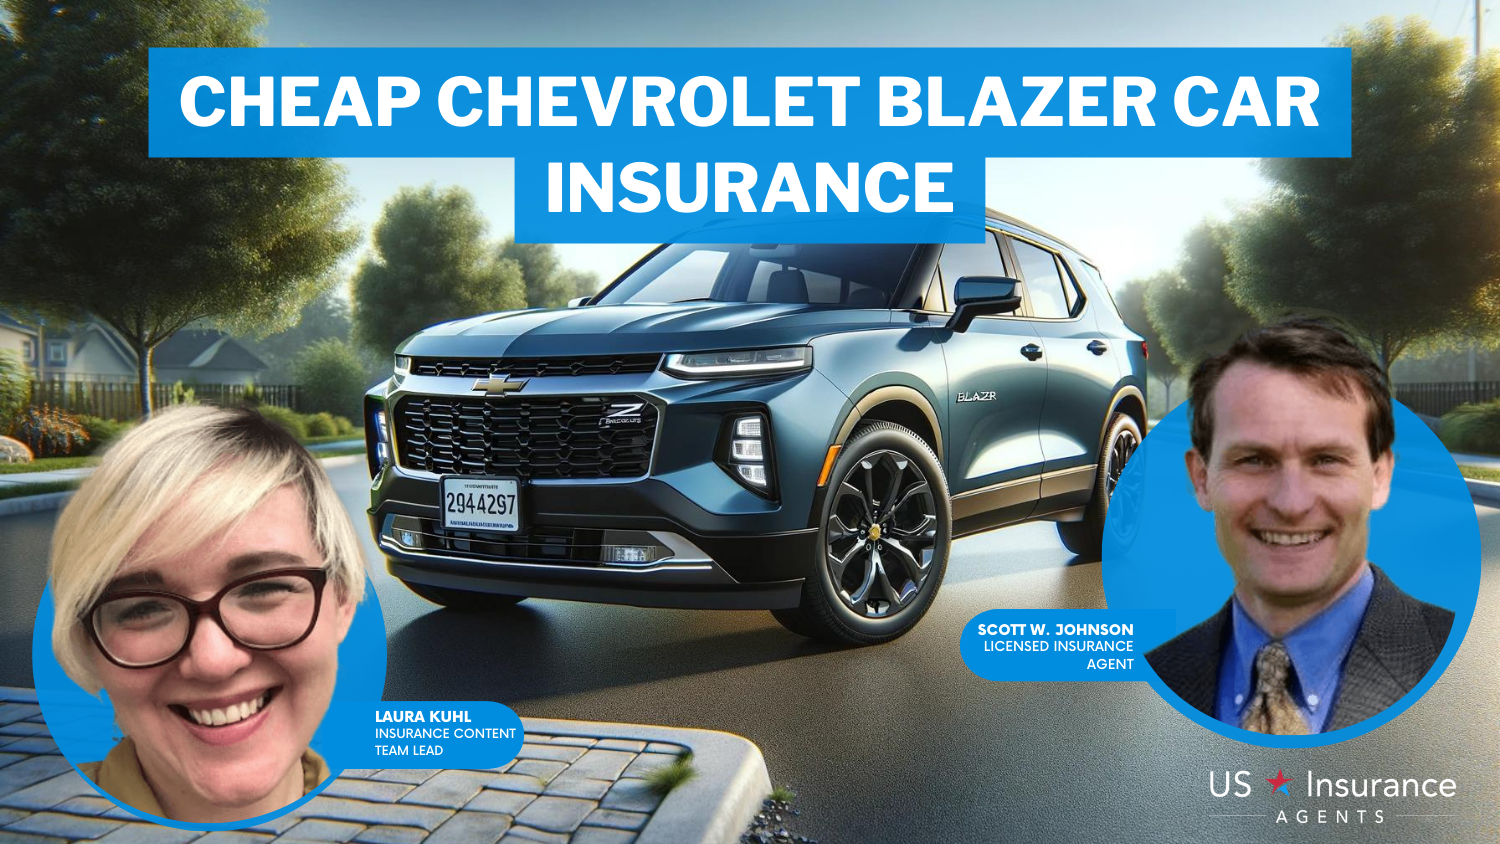 Cheap Chevrolet Blazer Car Insurance: Erie, Auto-Owners, and State Farm.